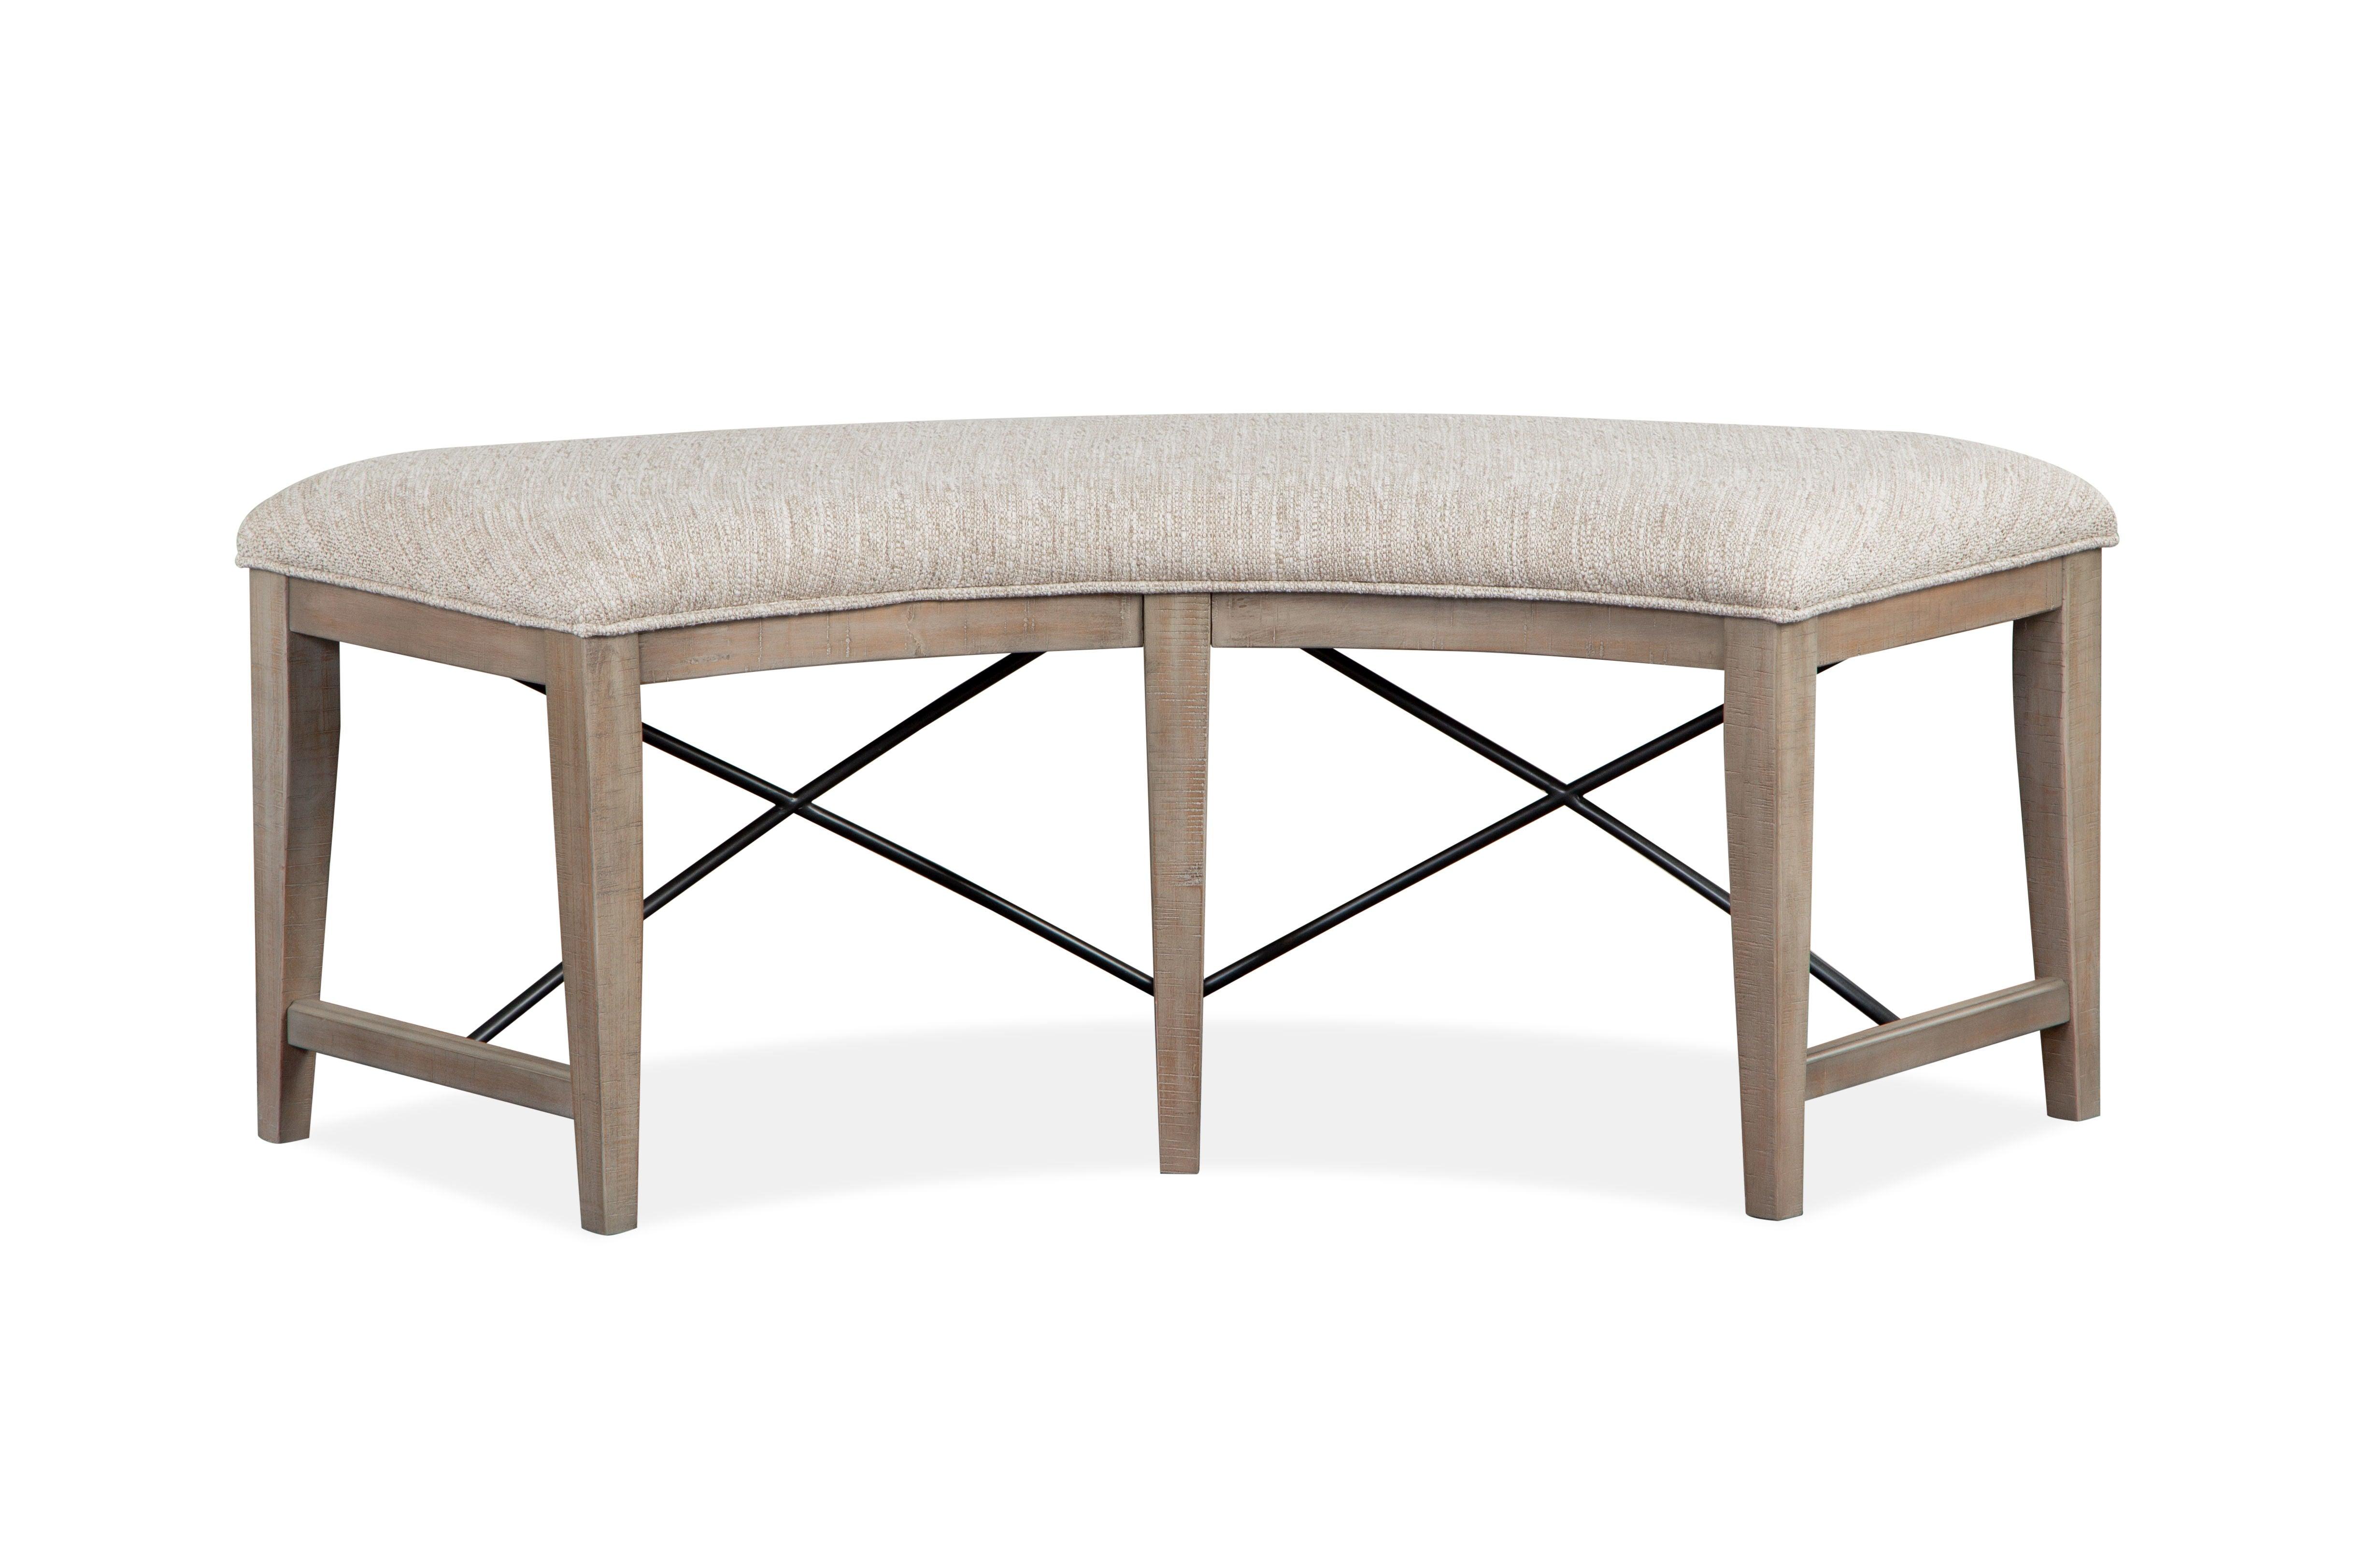 Magnussen Furniture - Paxton Place - Curved Bench With Upholstered Seat - Dovetail Grey - 5th Avenue Furniture